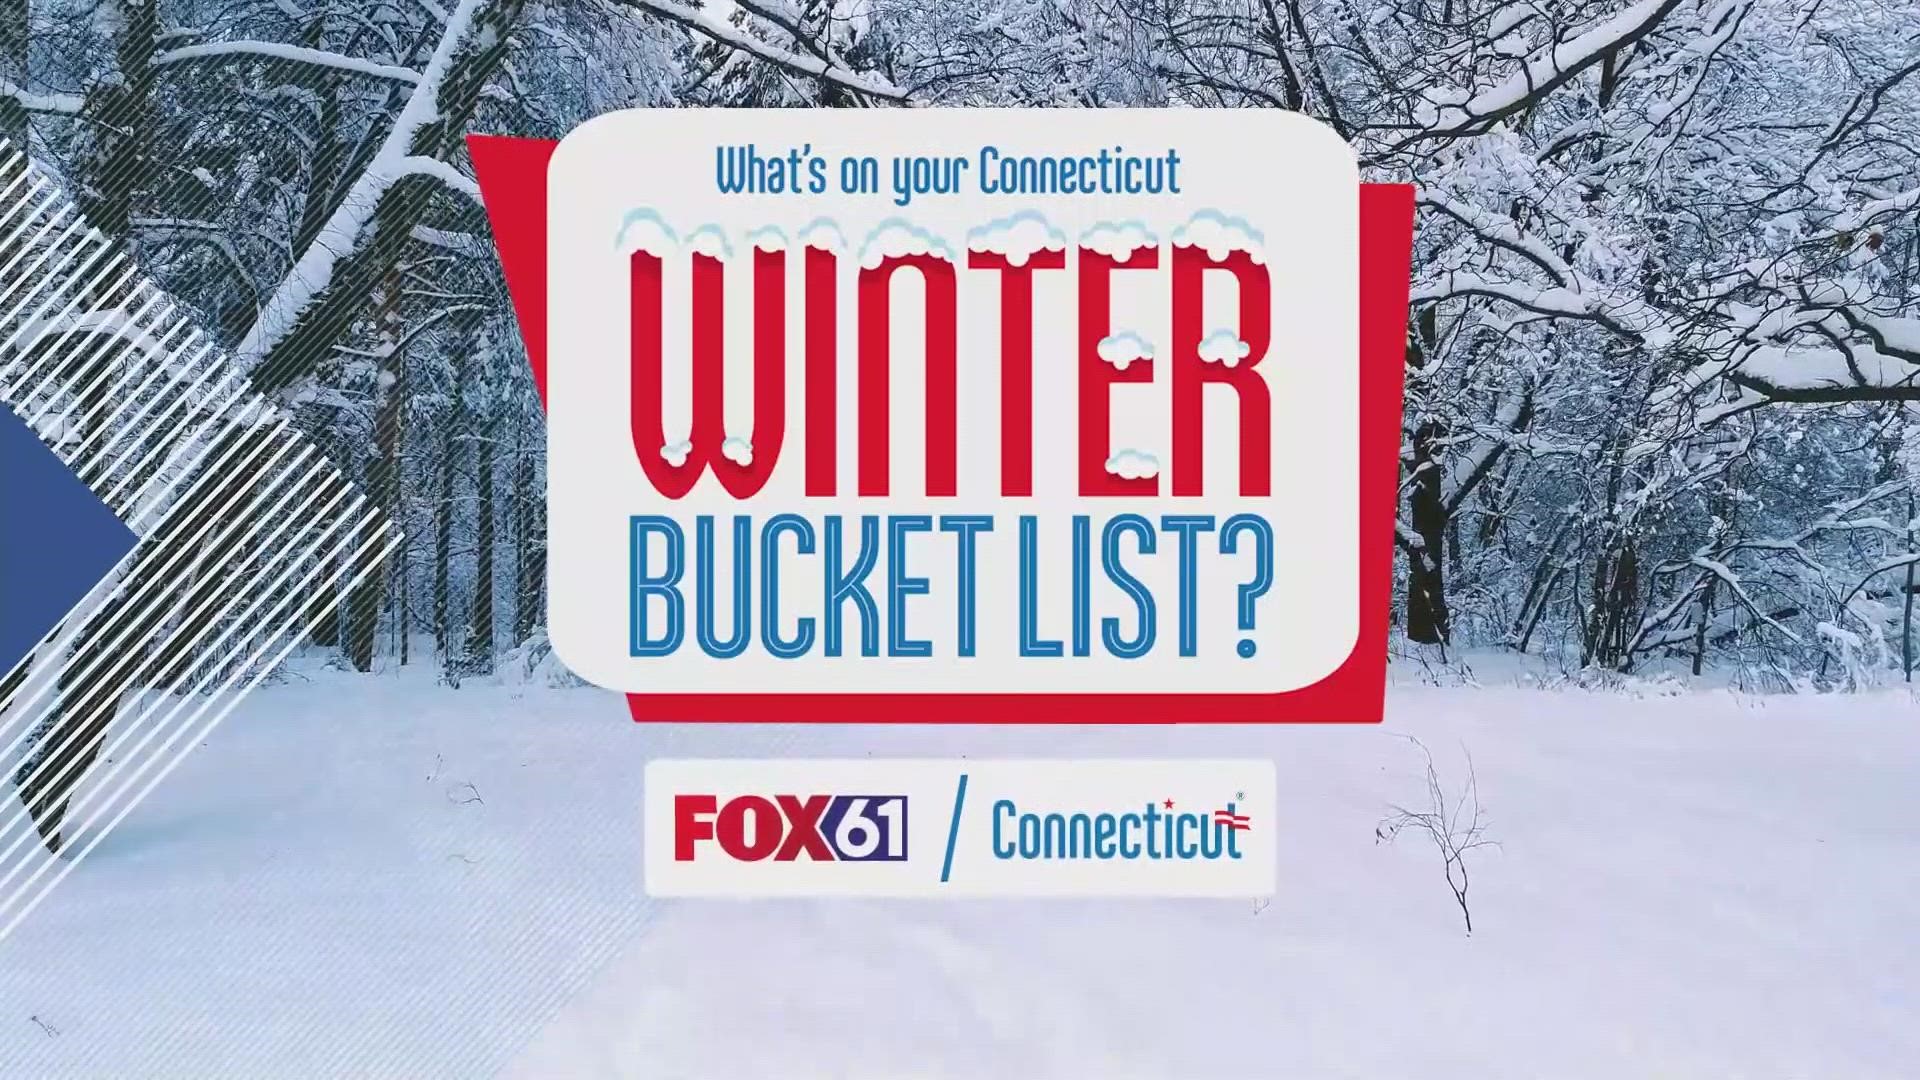 FOX61's Keith McGilvery and Rachel Piscitelli found fun places to go around the state and region as part of the 2023 Winter Bucket List.